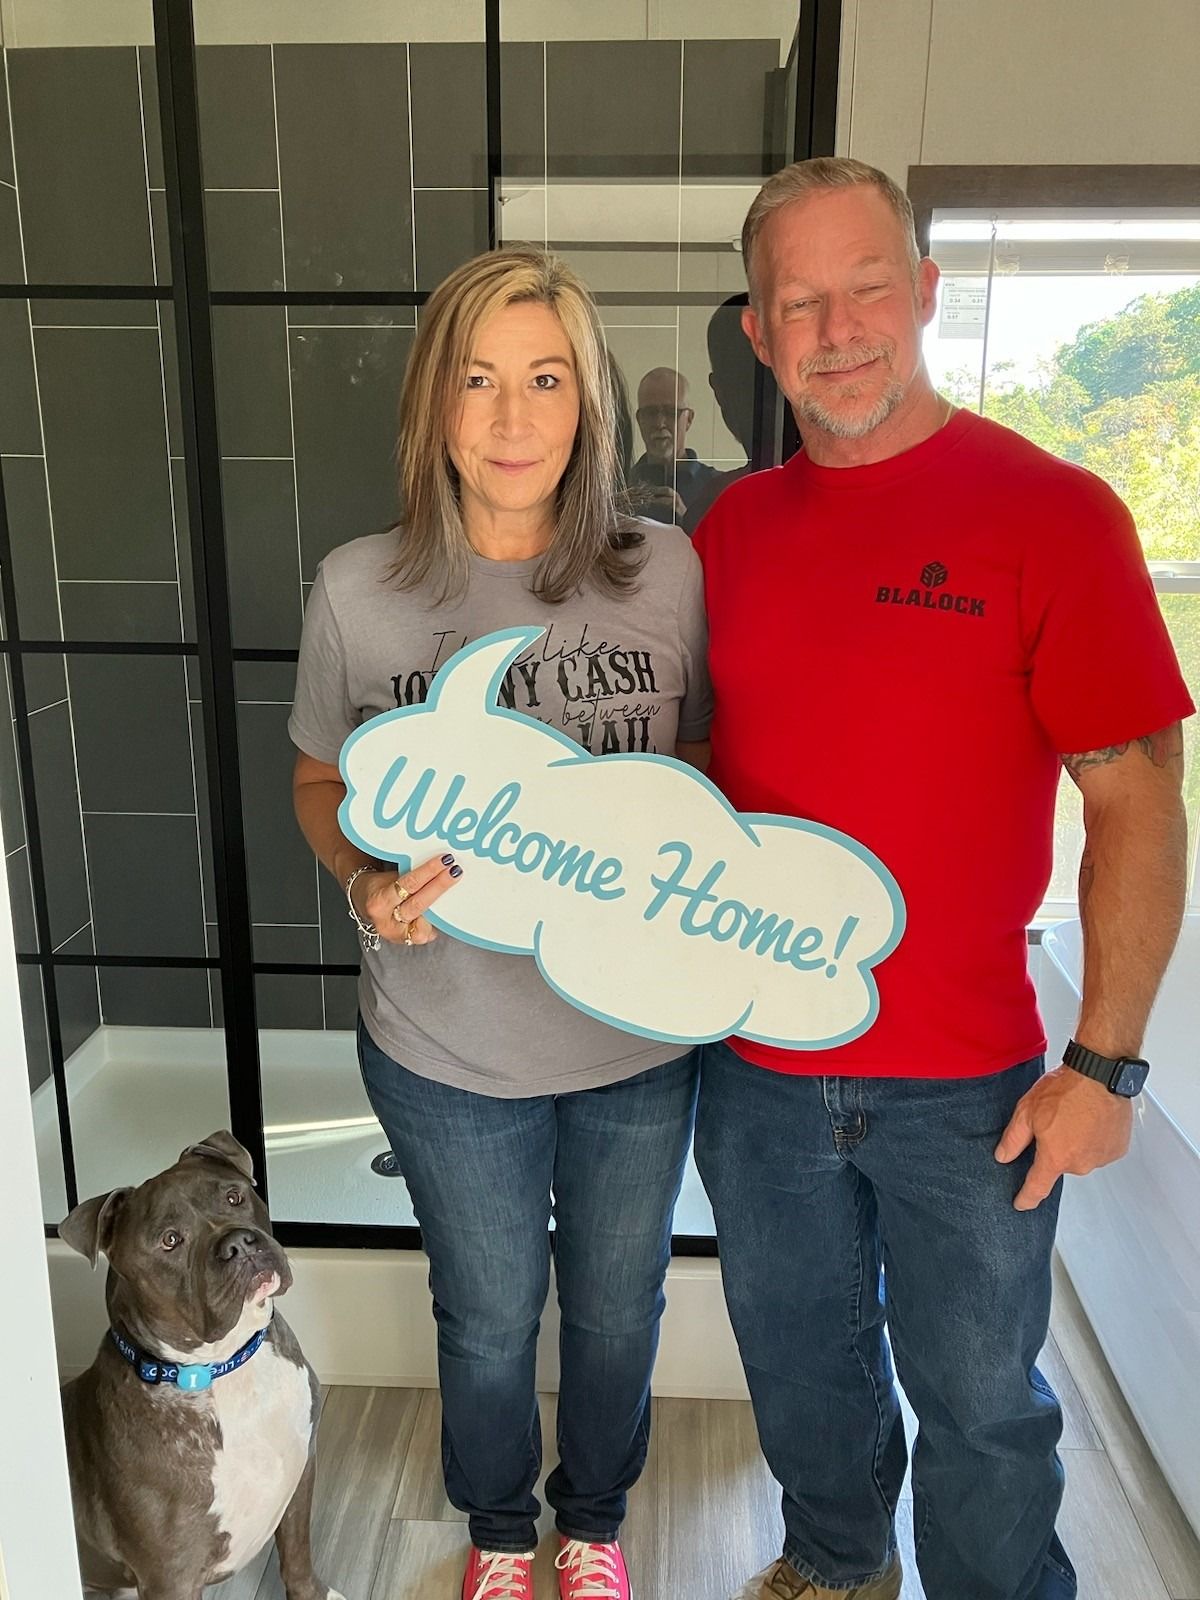 HEATHER T. welcome home image